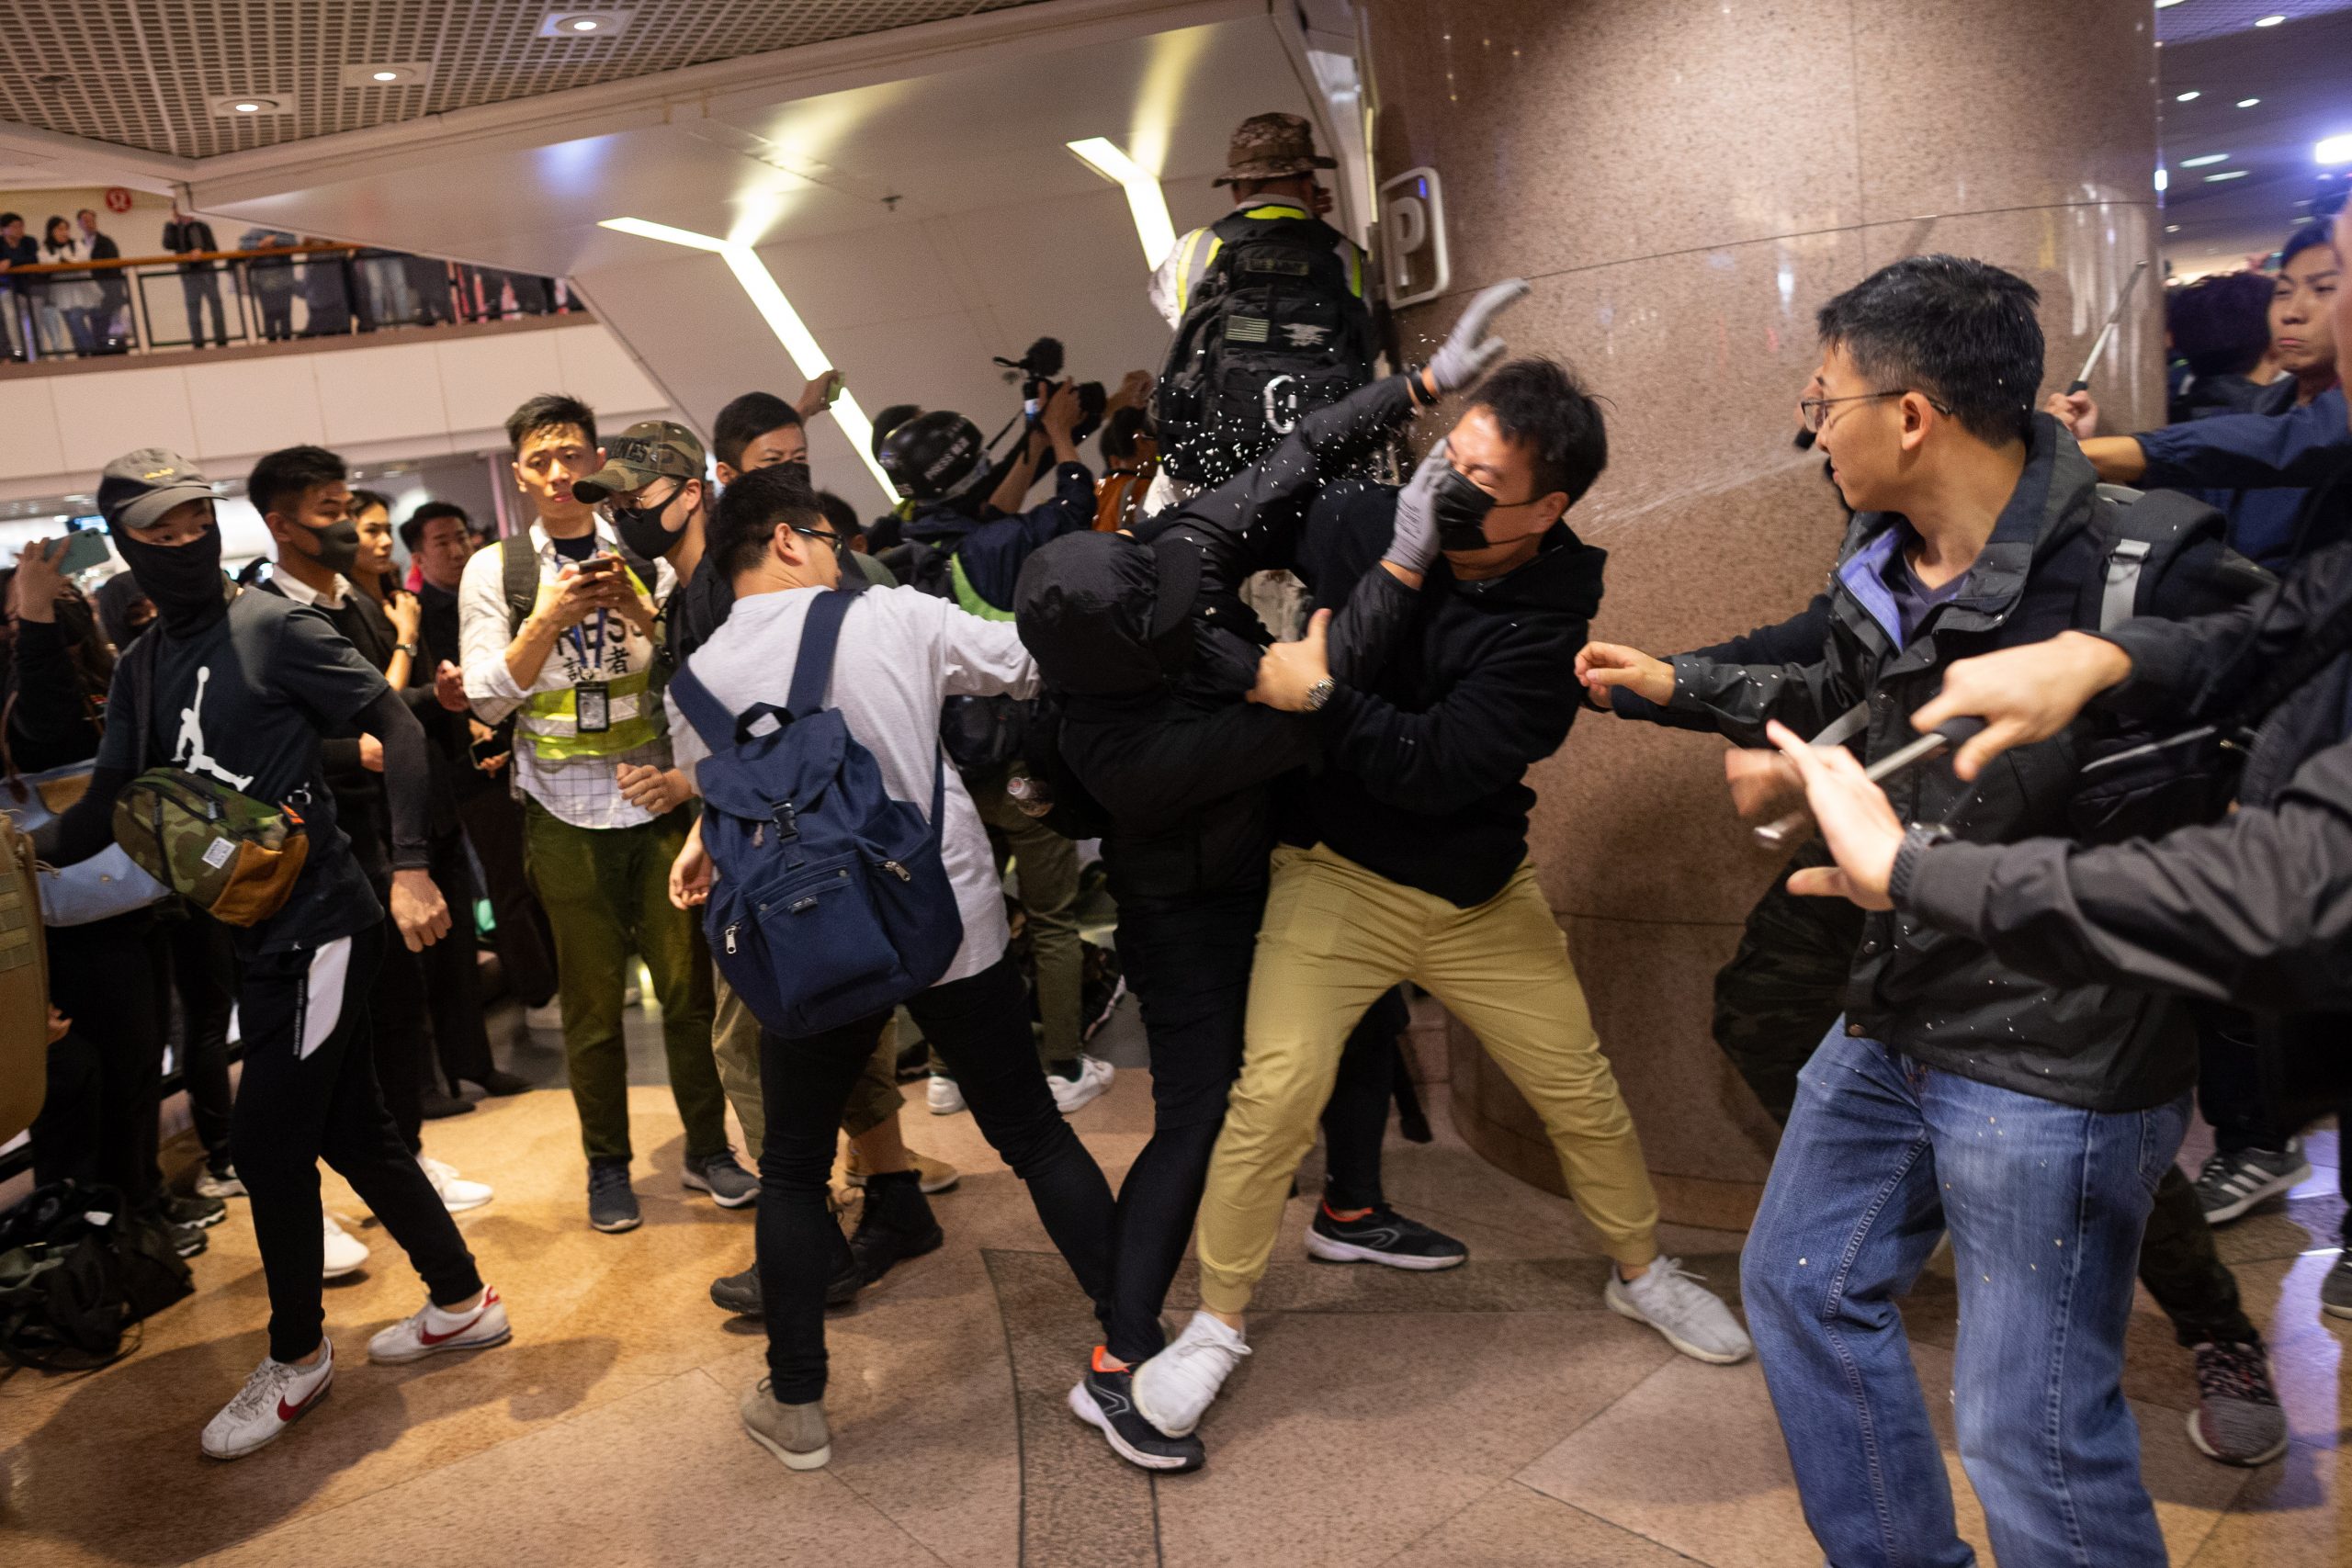 epa08089167 Plain cloth police officers clash with pro-democracy protesters in a shopping mall in Hong Kong, China, 24 December 2019. Police fired multiple rounds of tear gas in the tourist district of Tsim Sha Tsui on Christmas eve, after clashes broke out inside a shopping mall as a large number of protesters join a 'Christmas shopping' rally. Hong Kong has entered its seventh month of mass protests, which were originally triggered by a now withdrawn extradition bill, and have since turned into a wider pro-democracy movement.  EPA/JEROME FAVRE